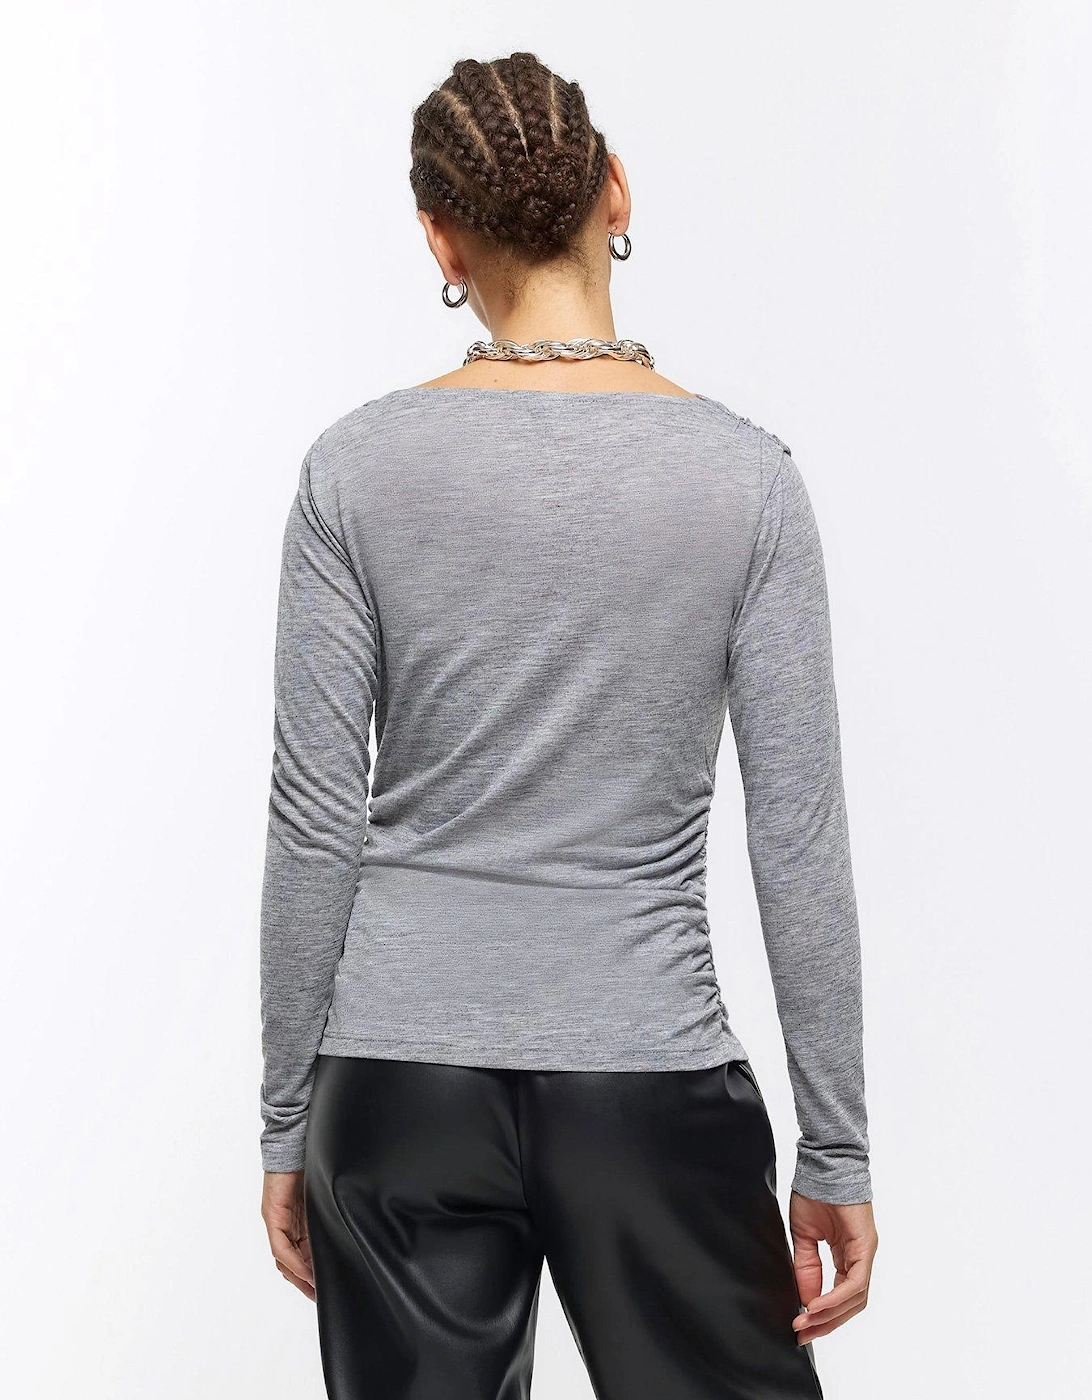 Ruched Detail Top - Grey Marl